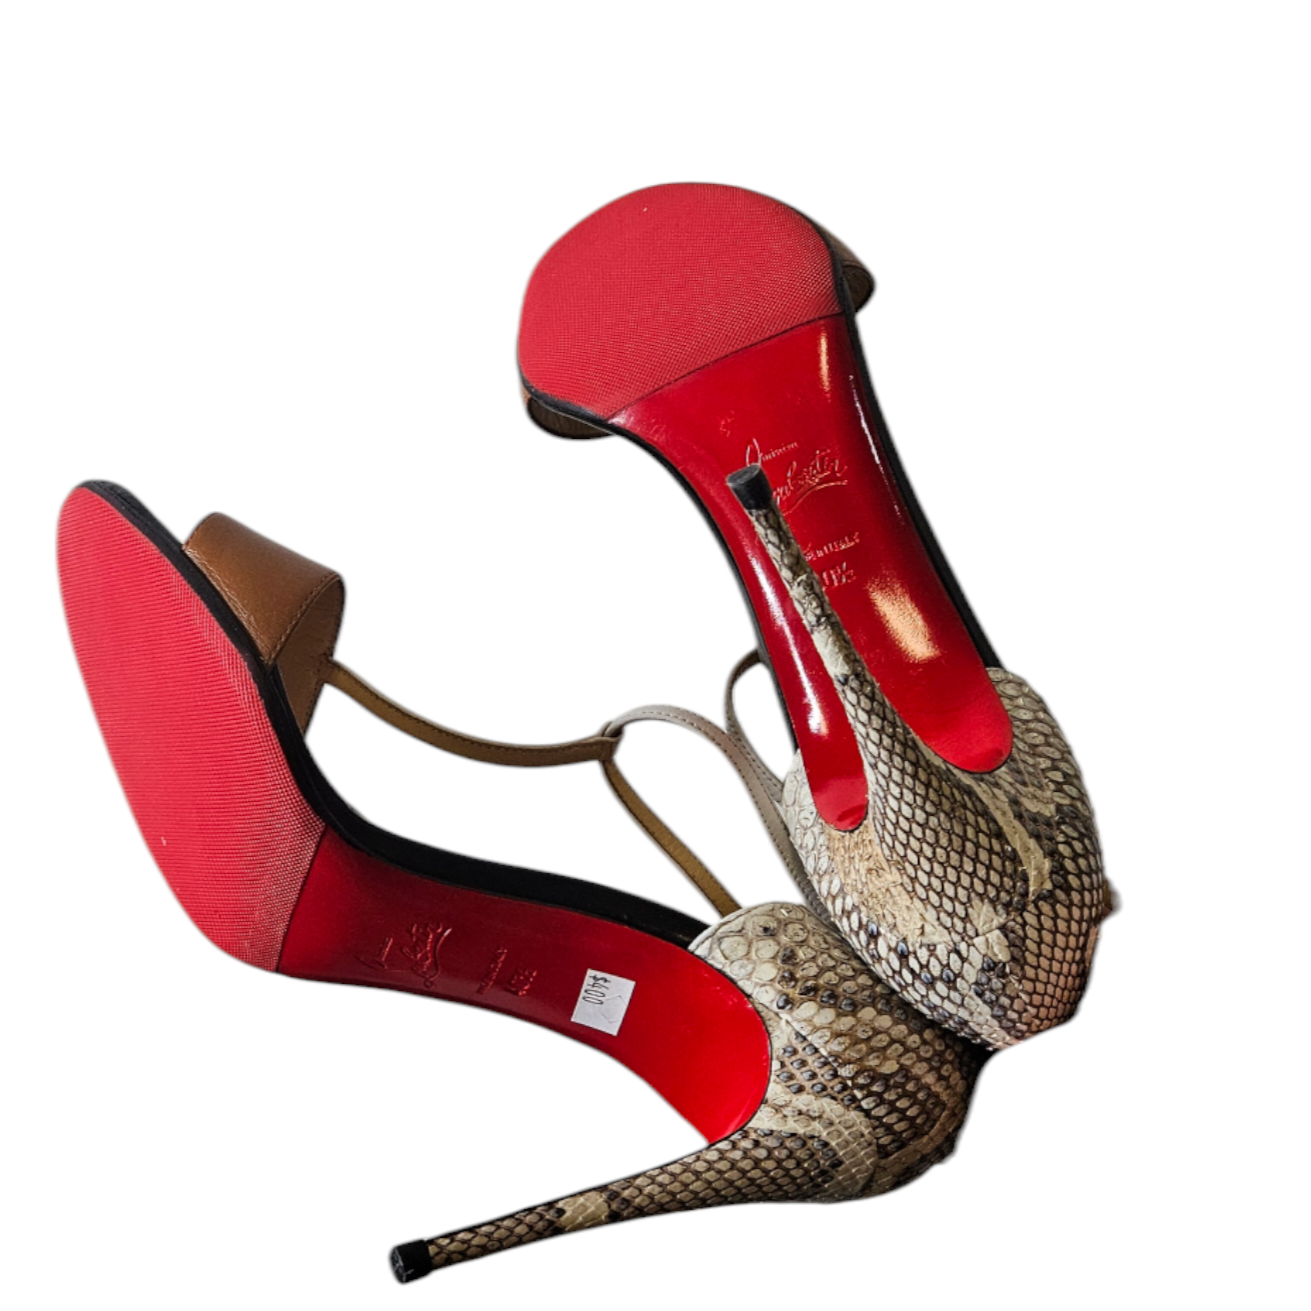 Christian Louboutin Snakeskin and Leather Heeled Sandals